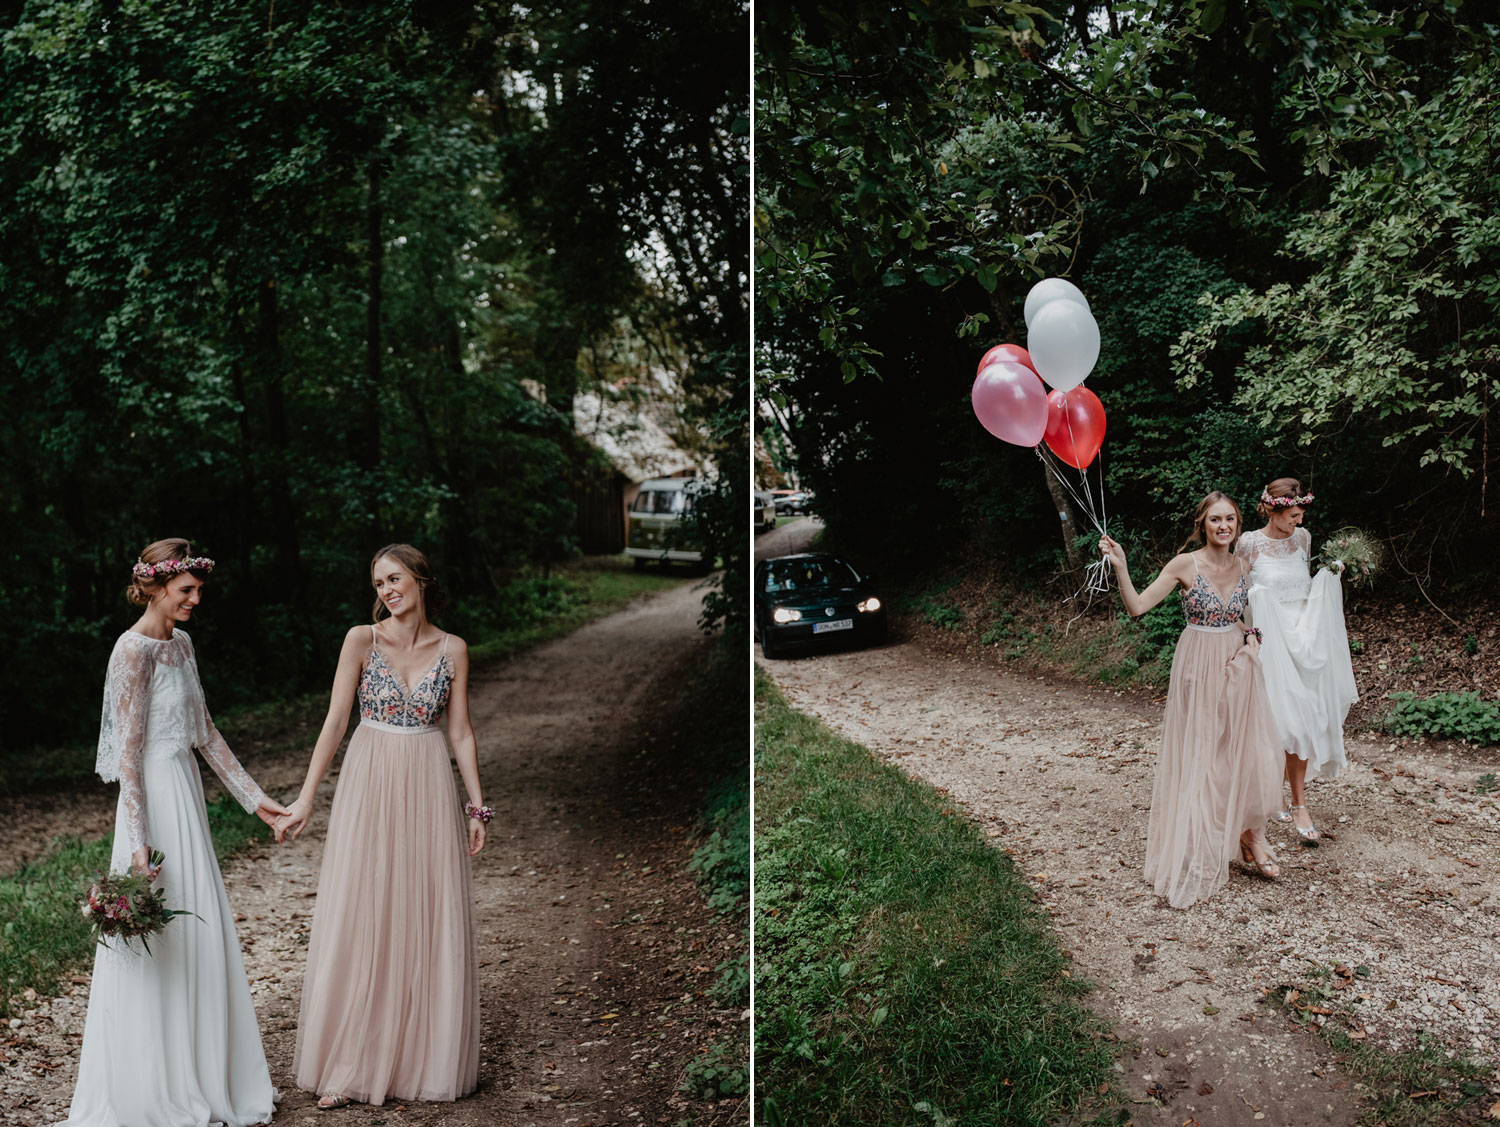 boho bride with flowercrown and bridesmaid with balloons at tipi wedding in forest